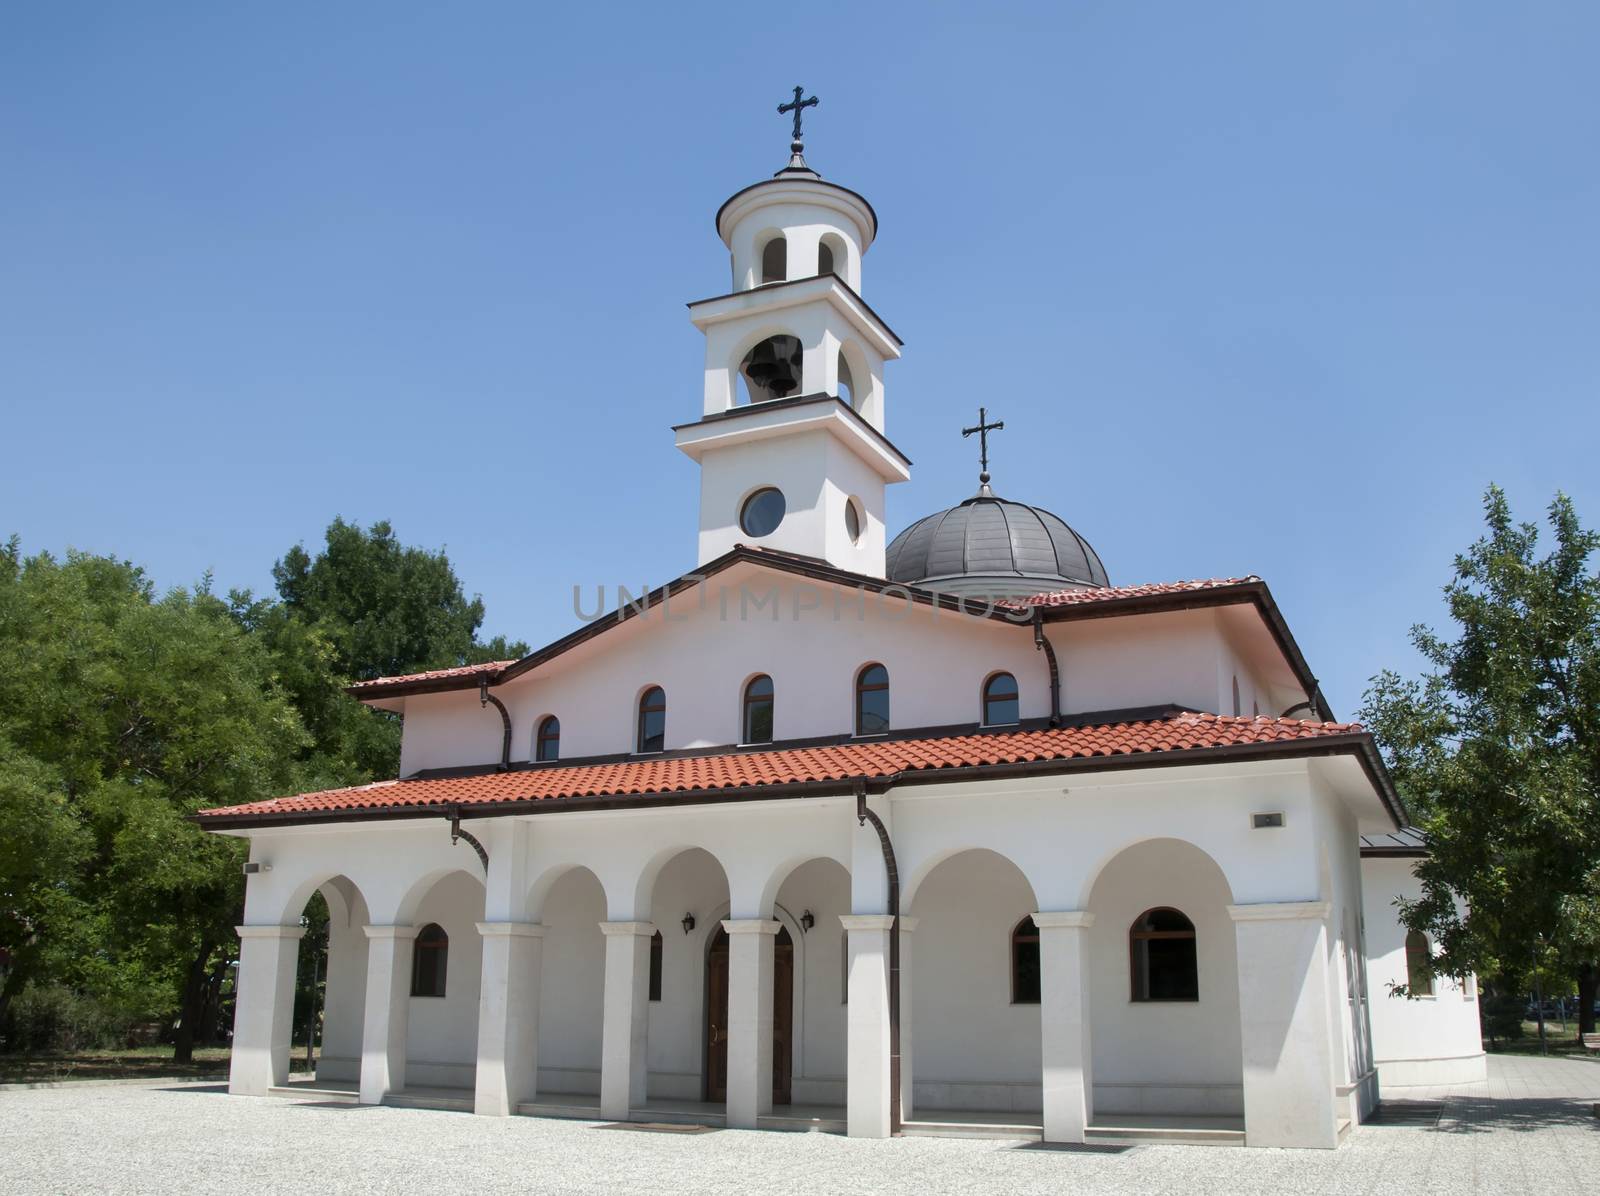 White Orthodox Church with two domes